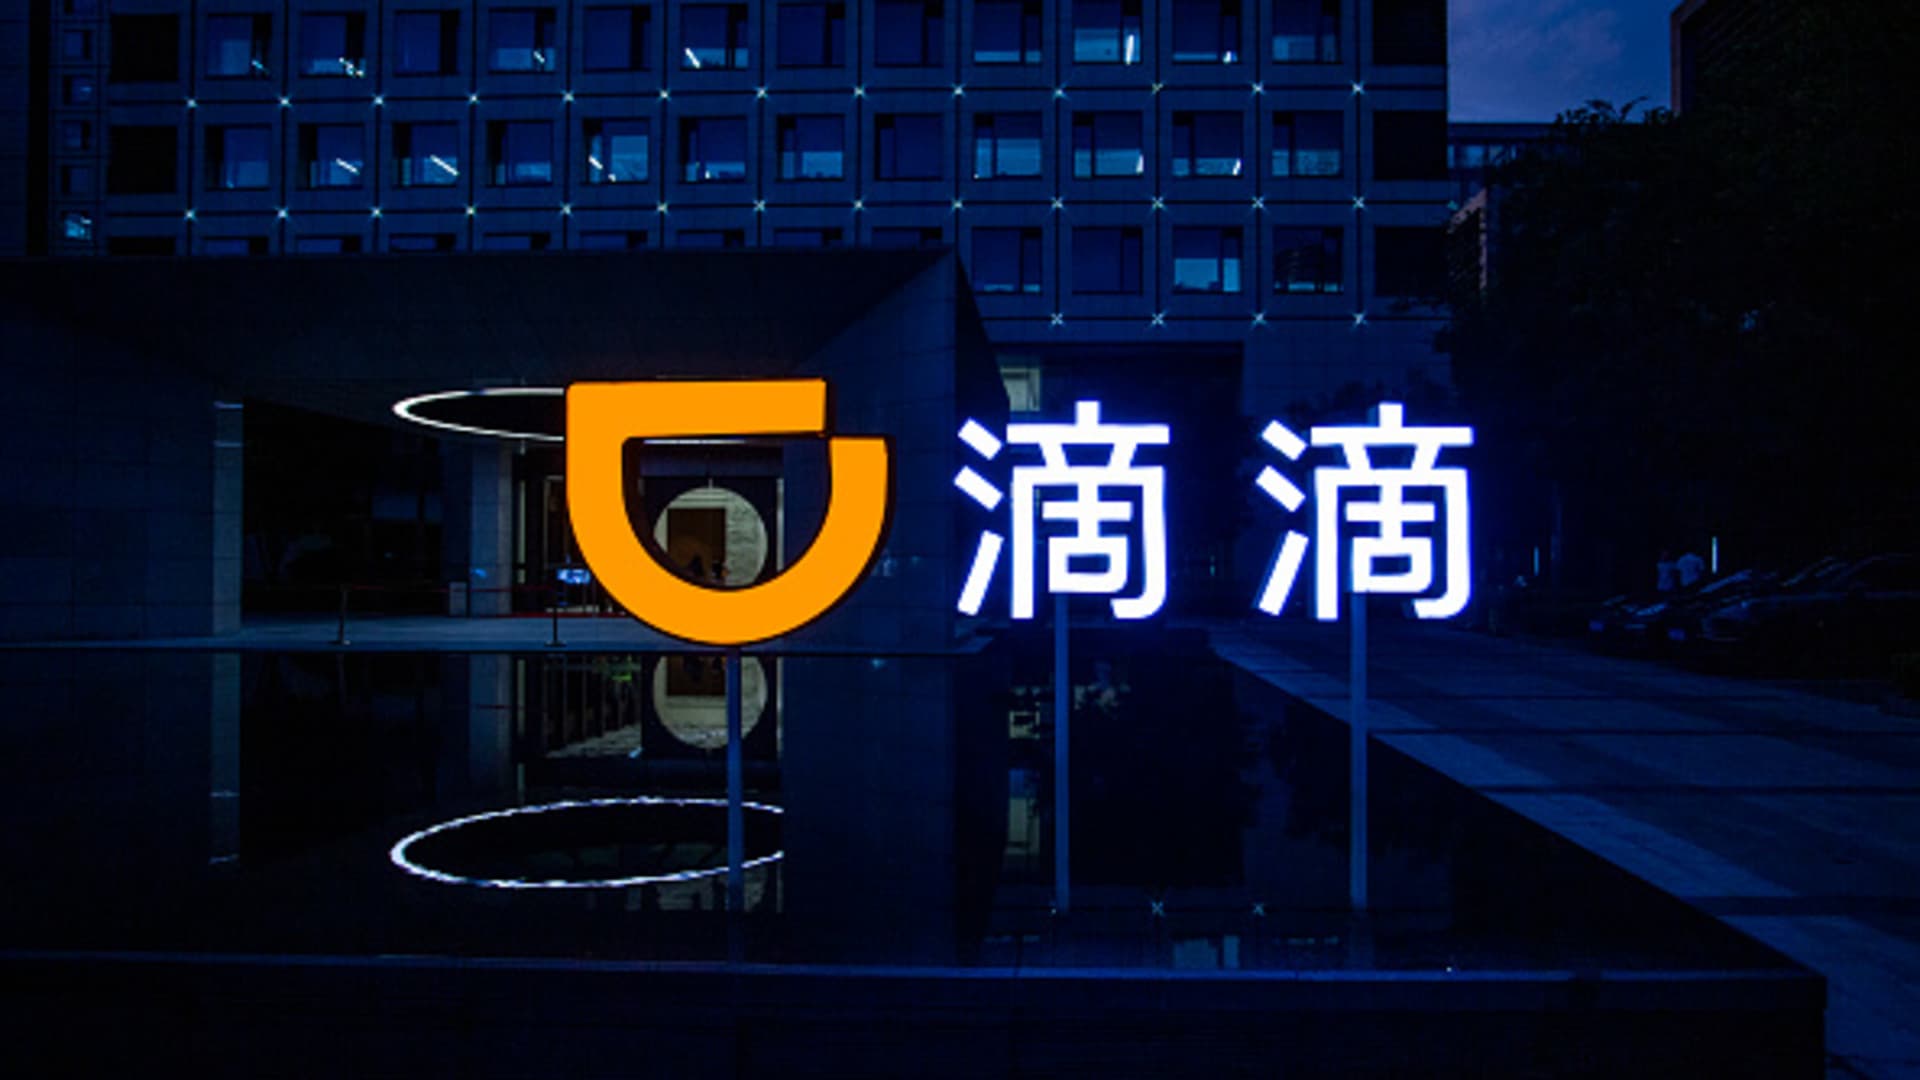 China's Didi plans expansion after Beijing's crackdown ends